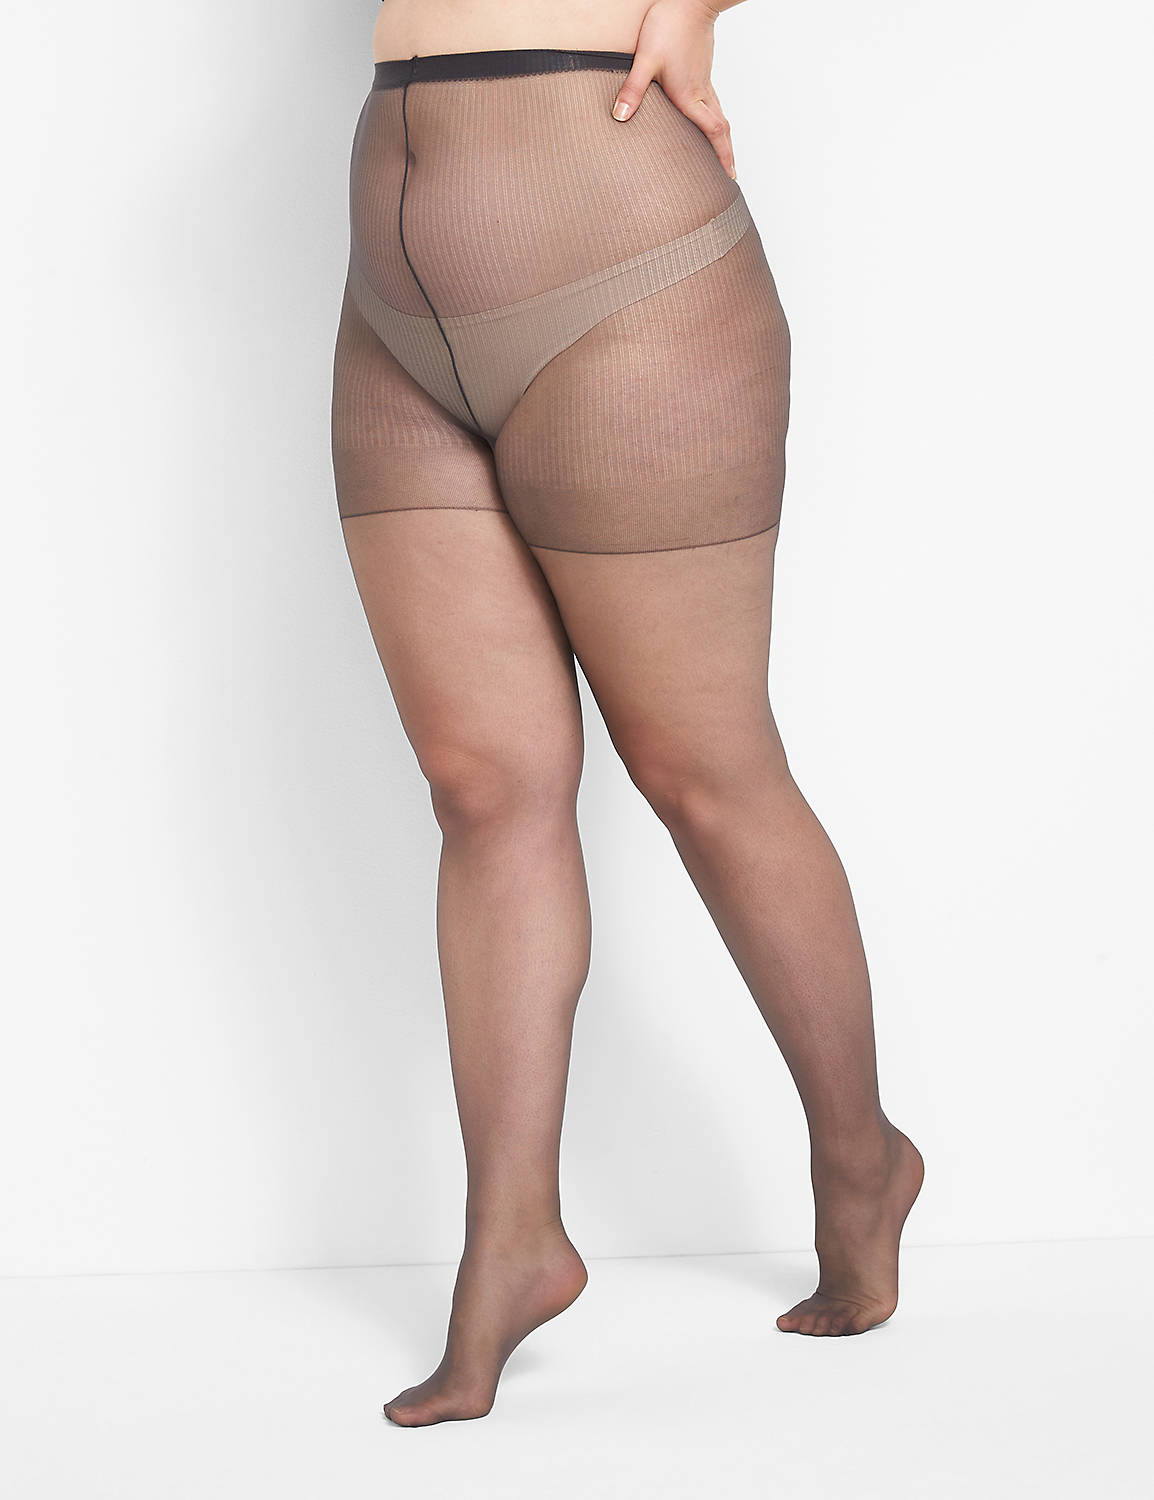 Day Sheer Tight Product Image 1